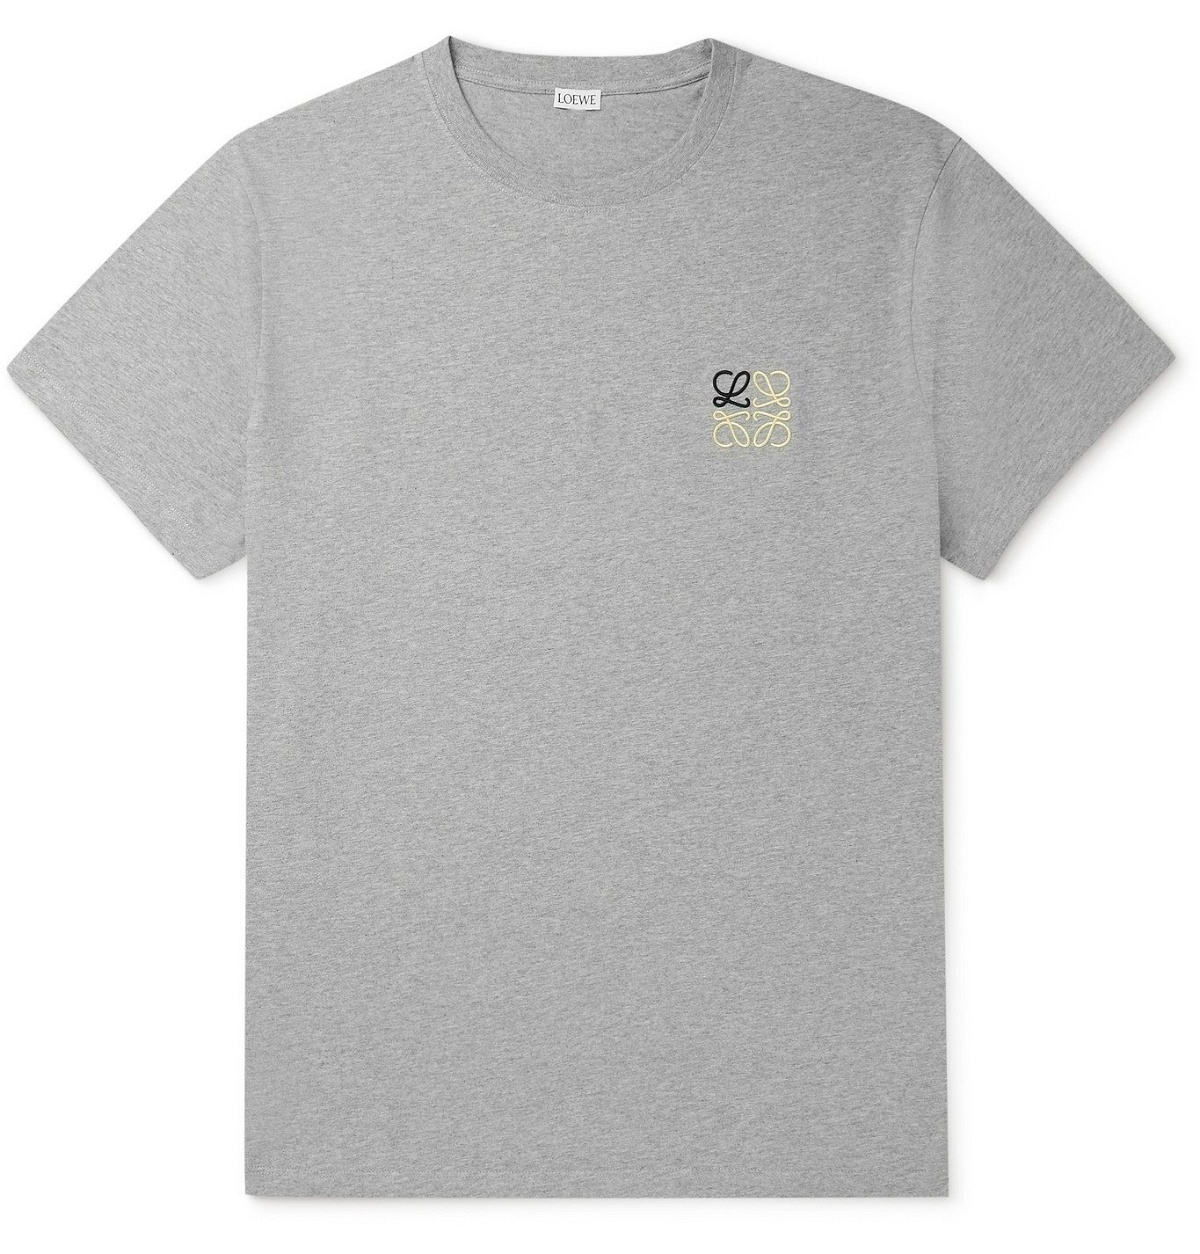 Loewe Logo-embroidered Cotton T-shirt in White for Men